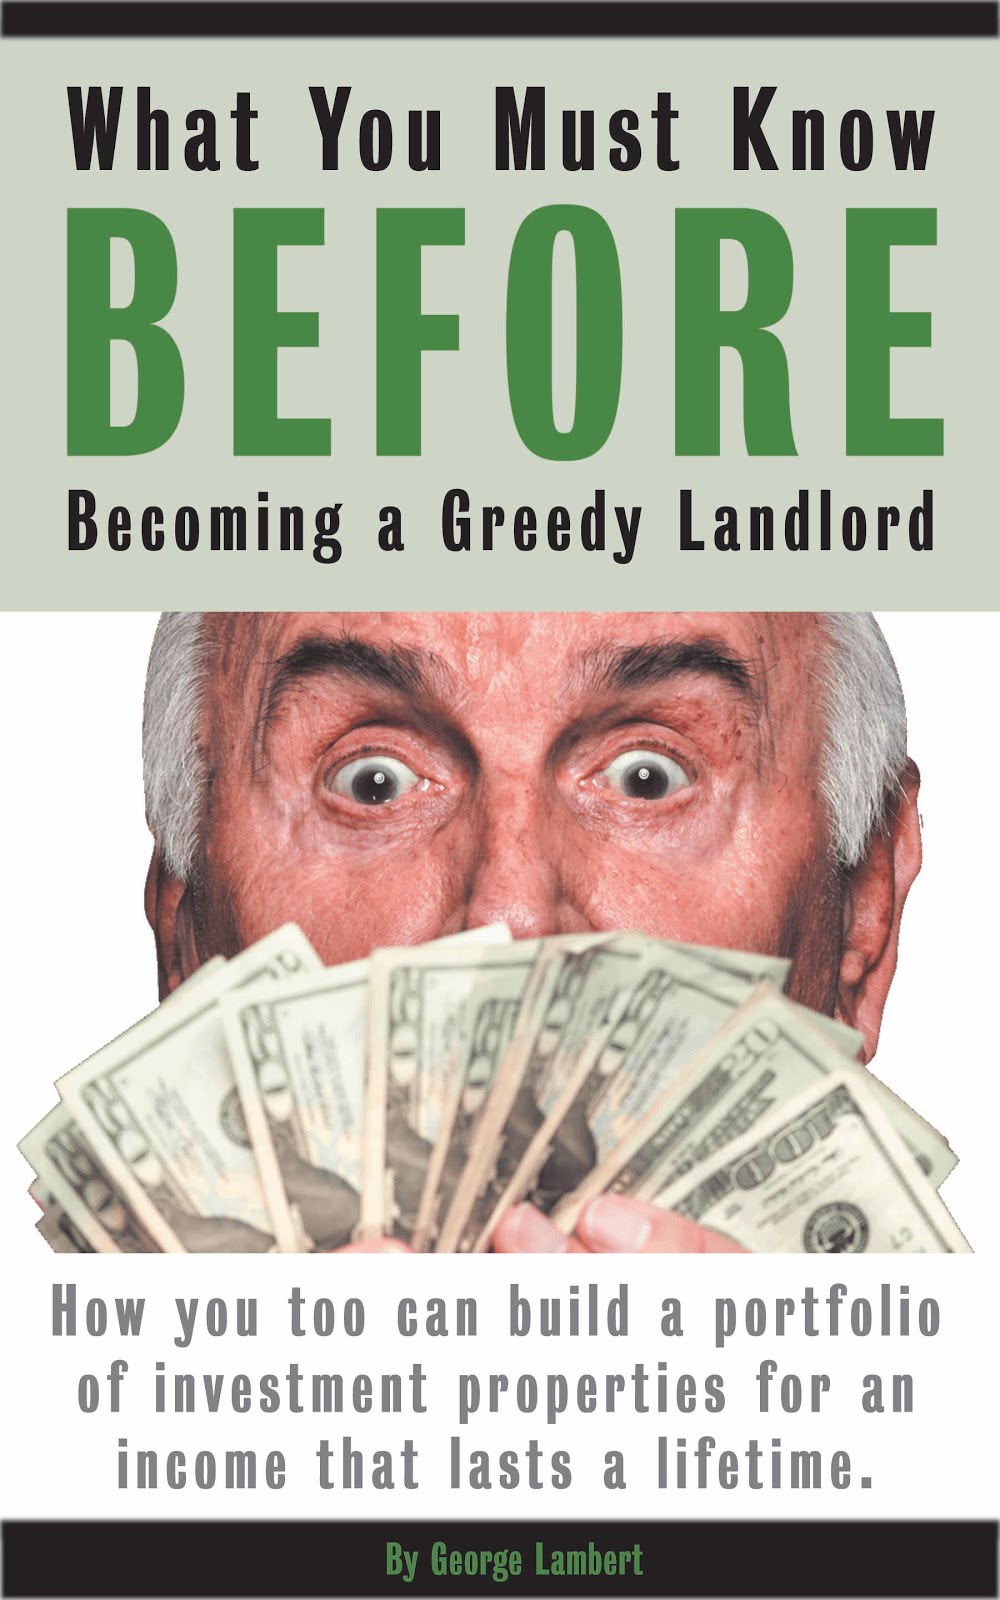 What You Must Know BEFORE Becoming a Greedy Landlord